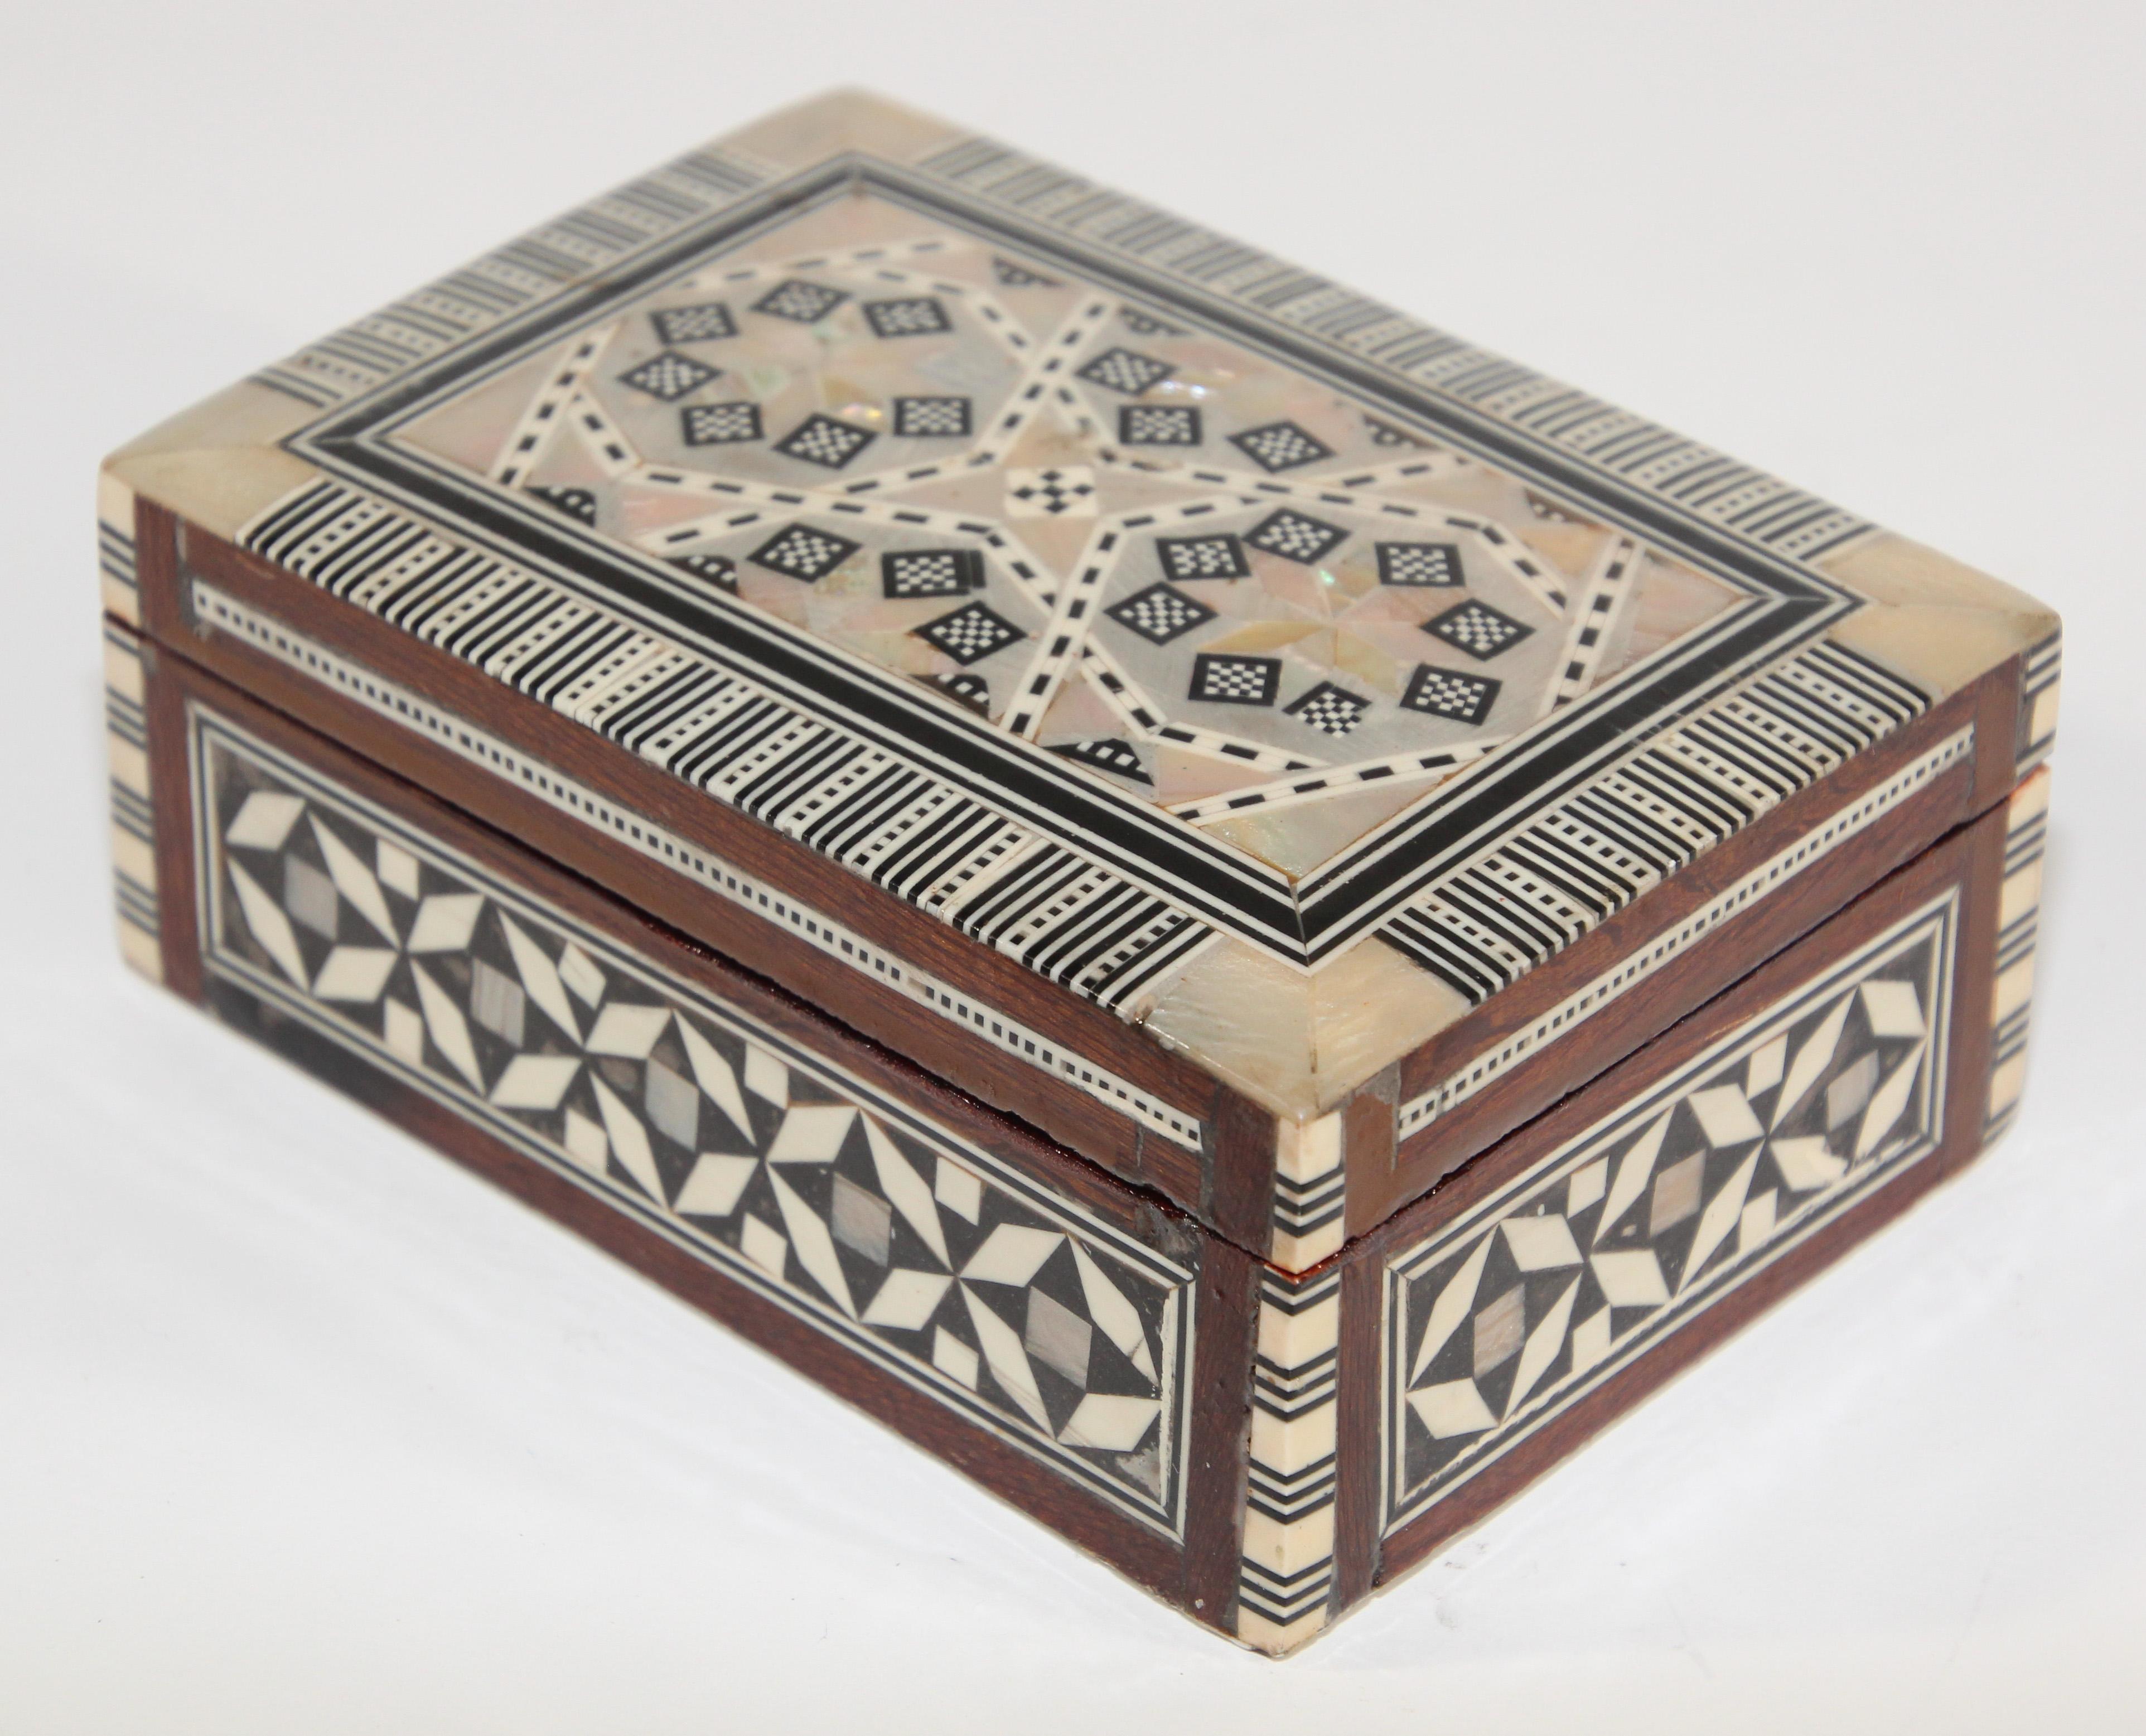 Handcrafted marquetry Moorish wood inlay micro mosaic inlaid with mother of pearl.
Handcrafted khatam wooden box with very delicate micro mosaic marquetry from the ancient Persian technique of inlaying from arrangements of so many delicate pieces